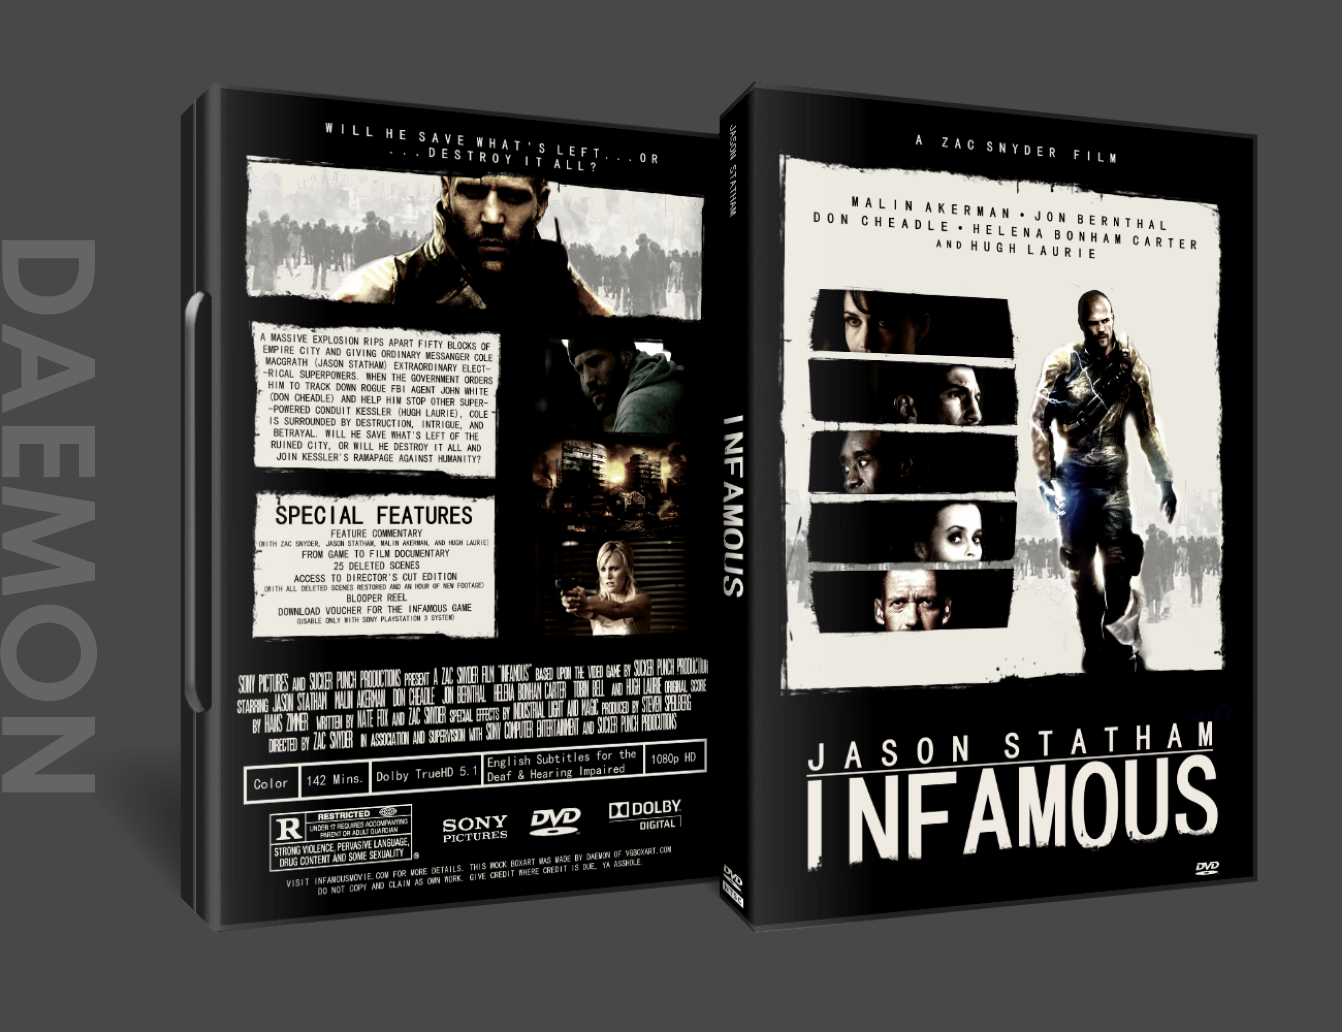 INFAMOUS box cover